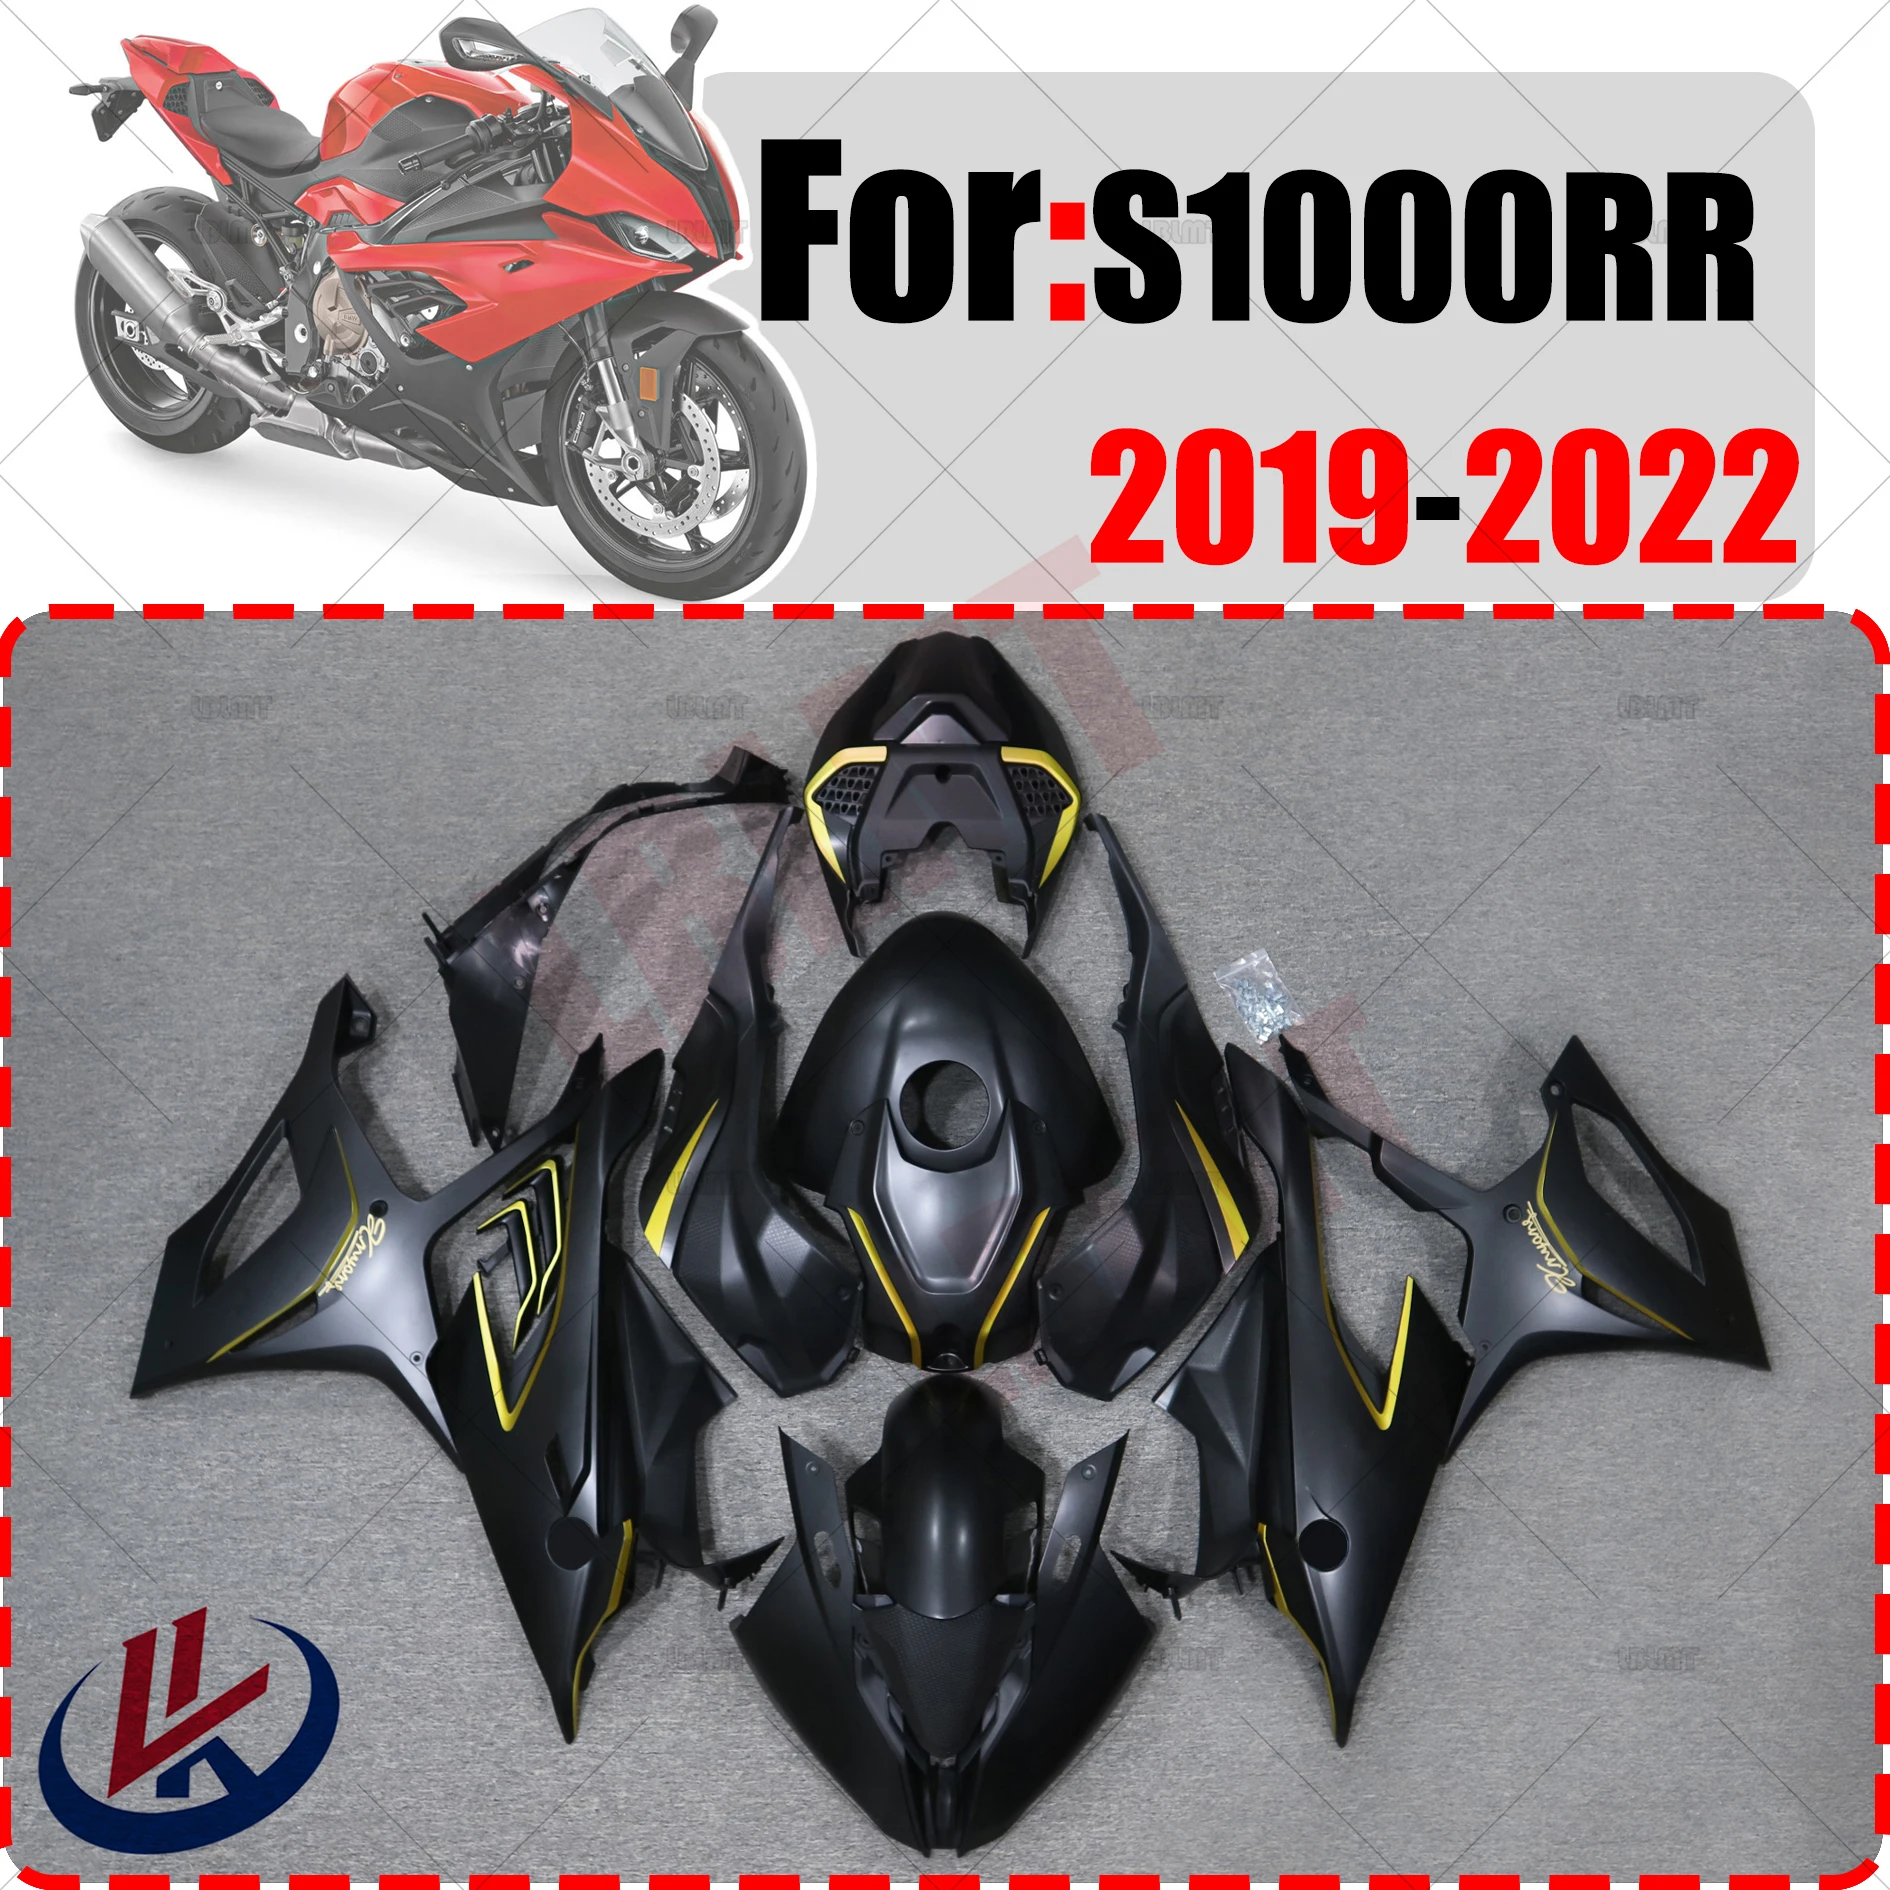 

For BMW S1000RR S1000 RR 2019 2020 2021 2022 Motorcycle Full Body Fit Fairing For BMW S1000RR ABS injection molding Full Fairing